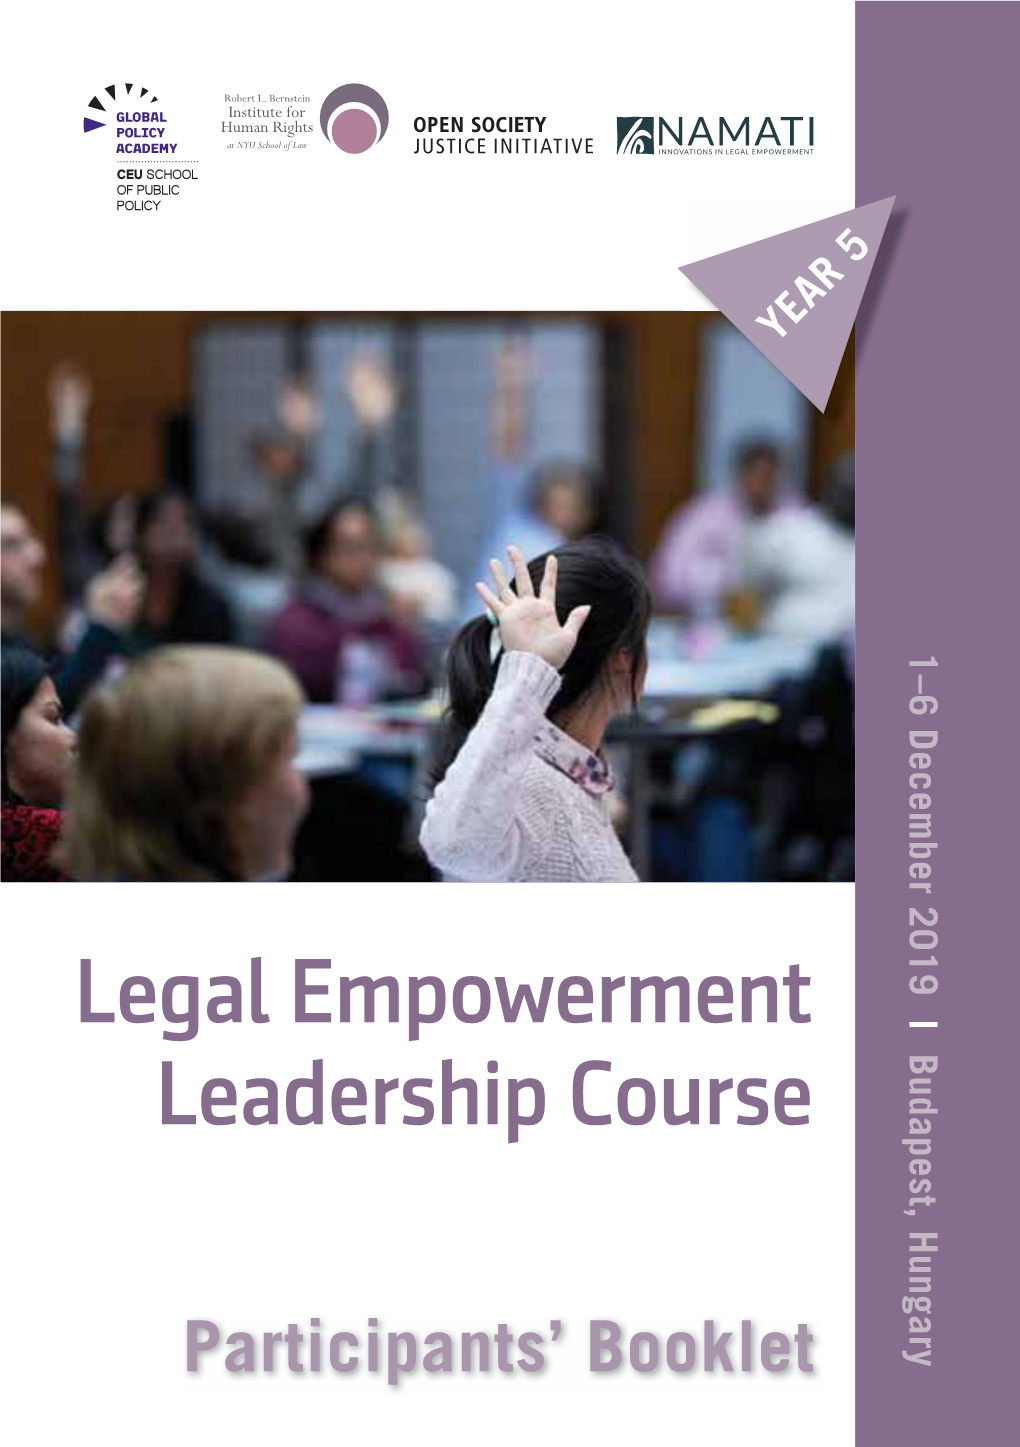 Legal Empowerment Leadership Course in Budapest Is a Unique